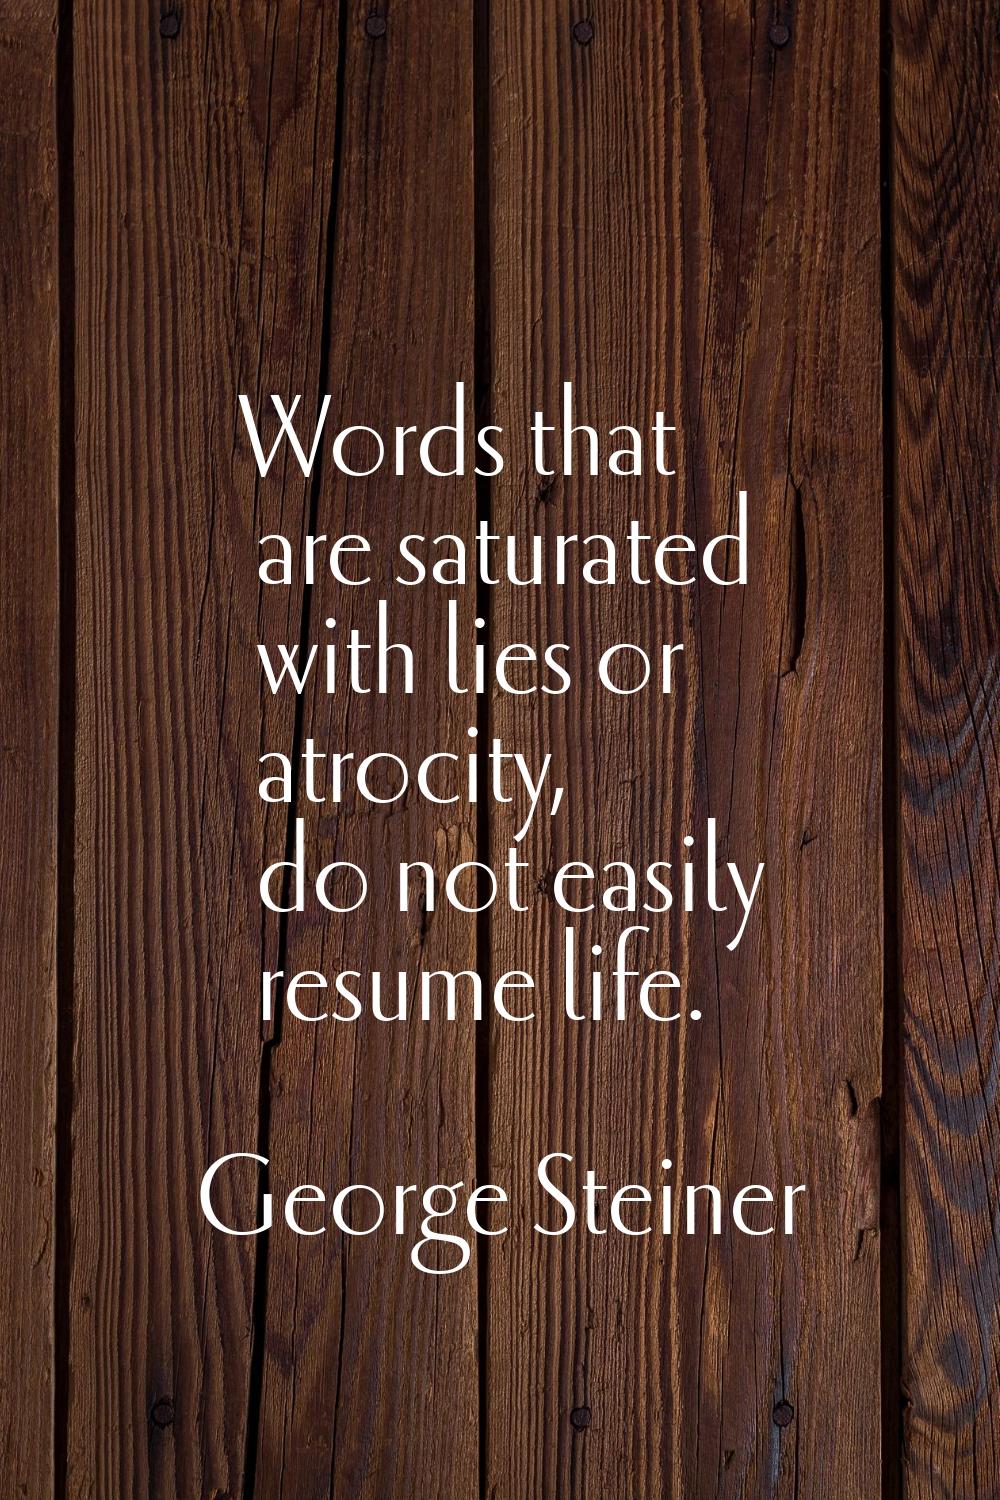 Words that are saturated with lies or atrocity, do not easily resume life.